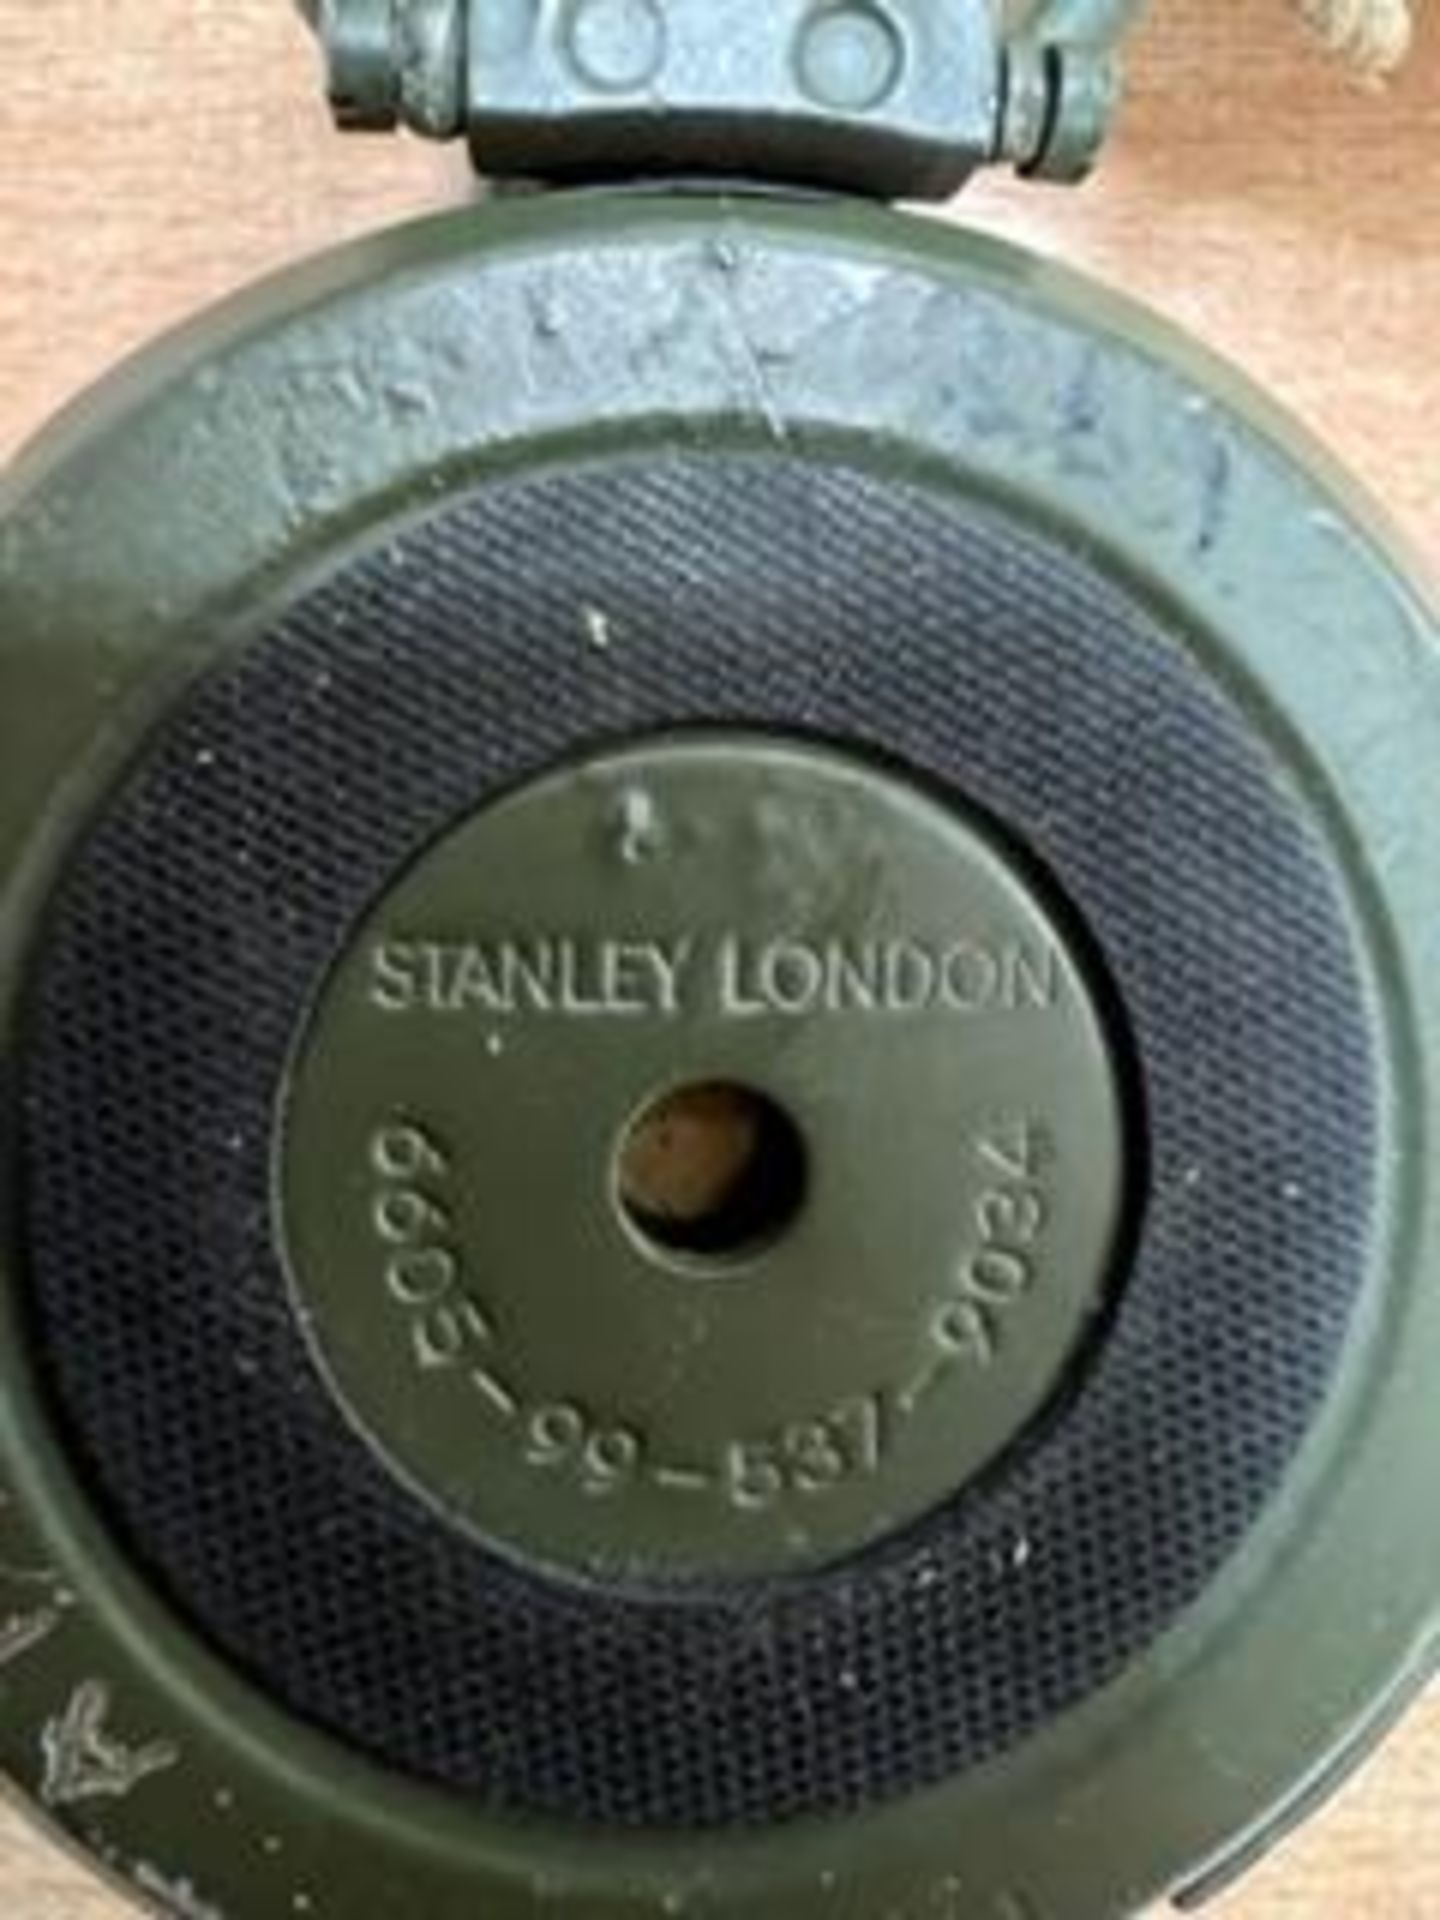 STANLEY LONDON BRITISH ARMY BRASS PRISMATIC COMPASS IN MILS - Image 5 of 6